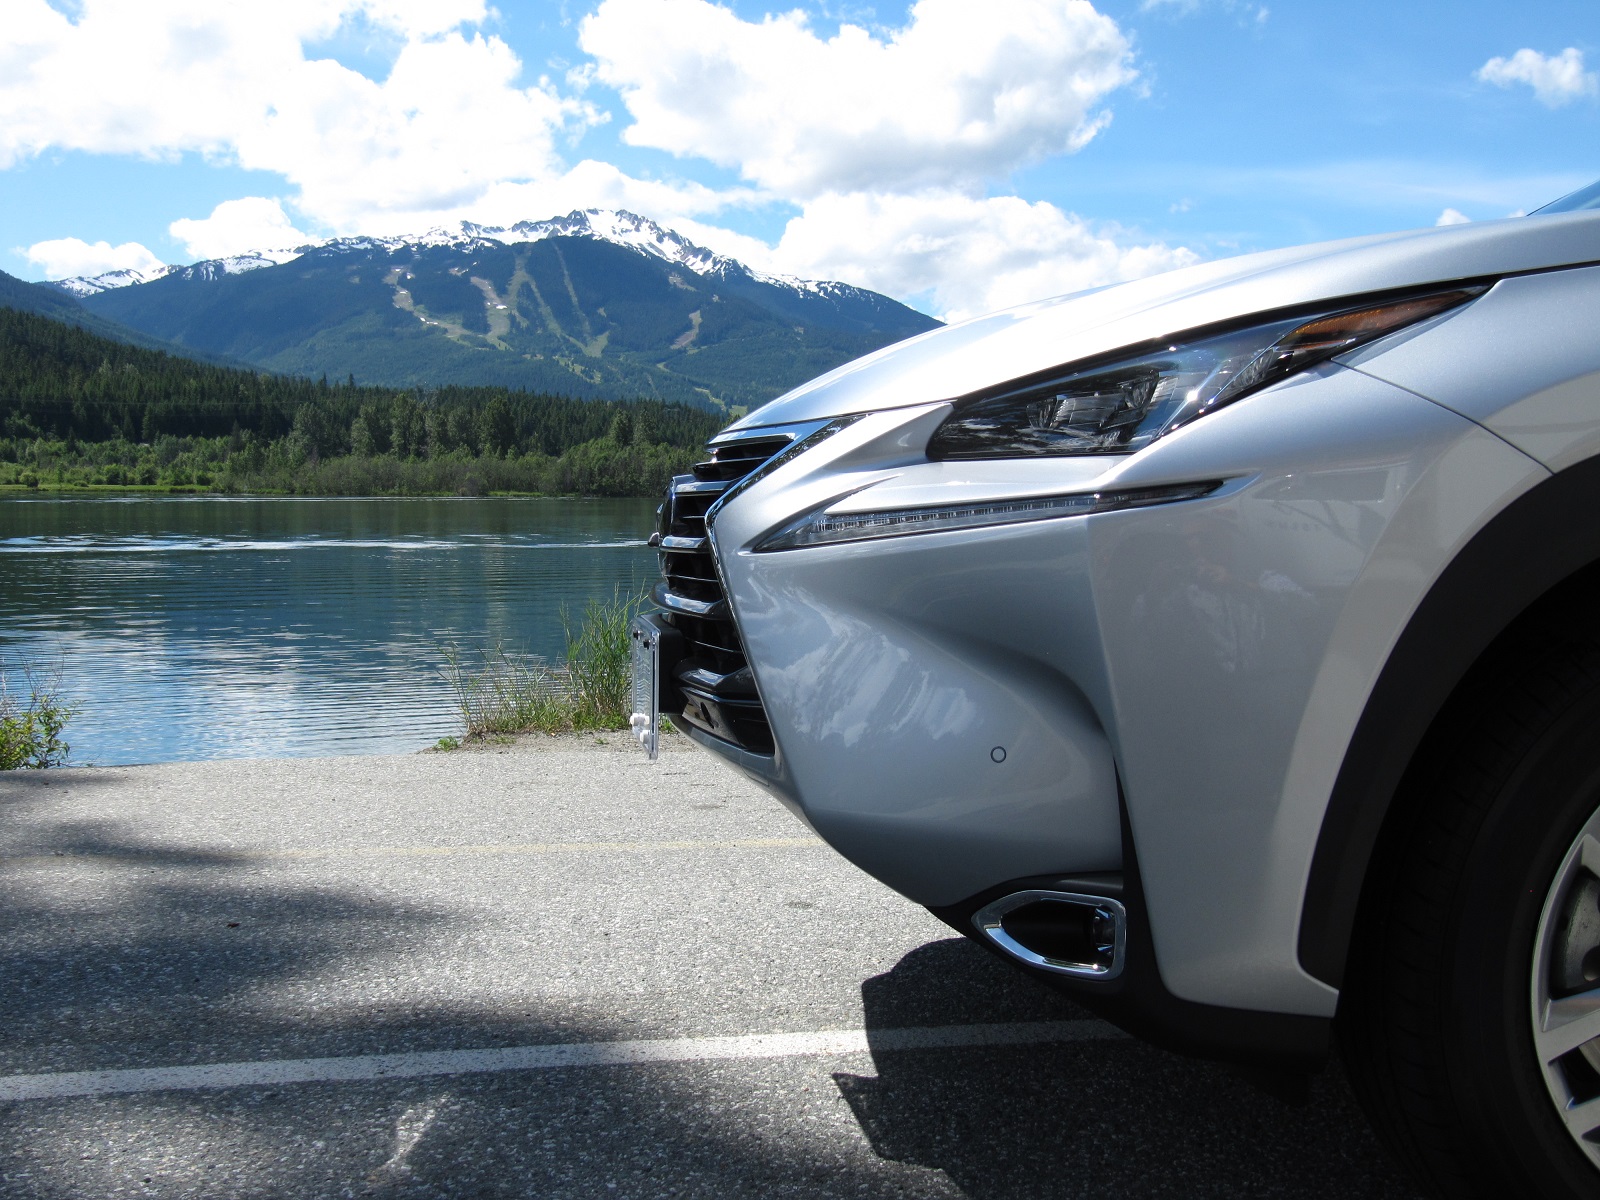 2015 Lexus NX 300h Hybrid: First Drive Of Luxury Compact Utility Vehicle